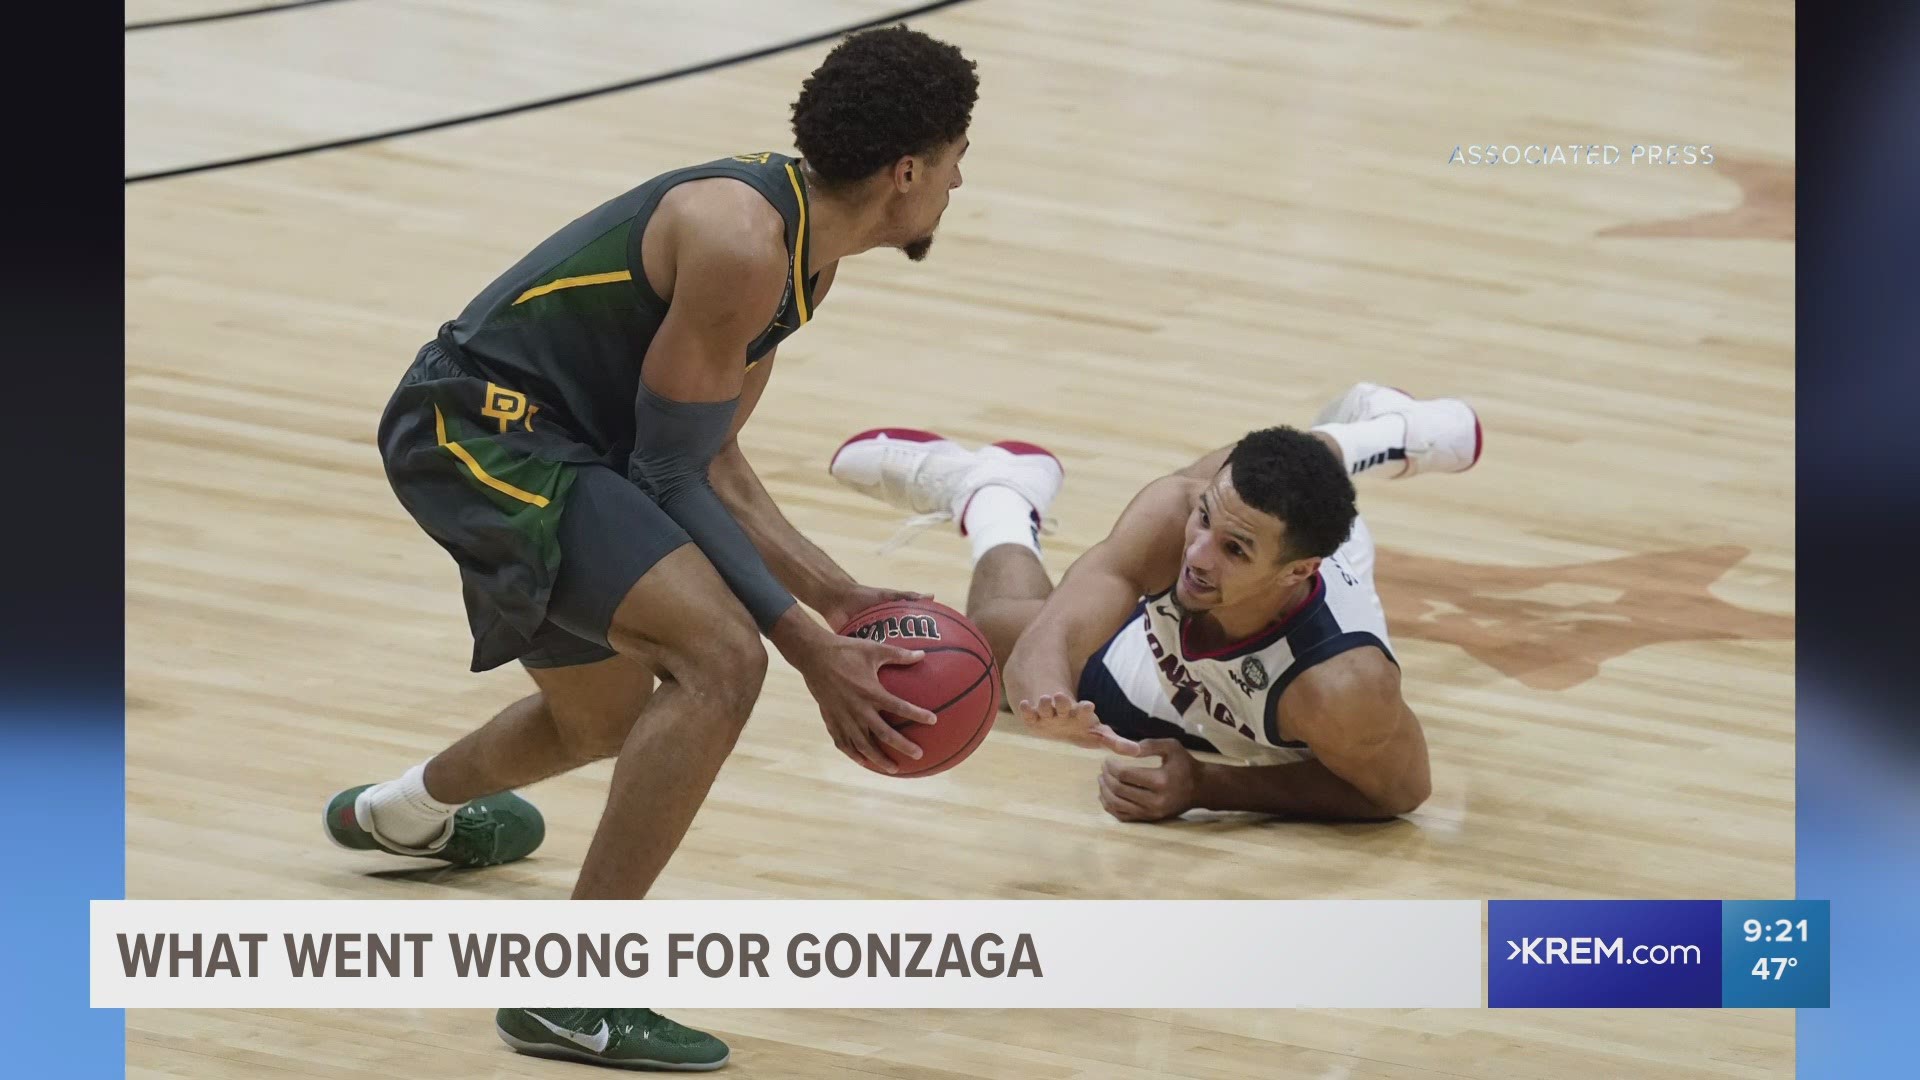 Gonzaga lost to Baylor in the national championship game 86-70 as they attempted to pull off a perfect season and the program's first national title.